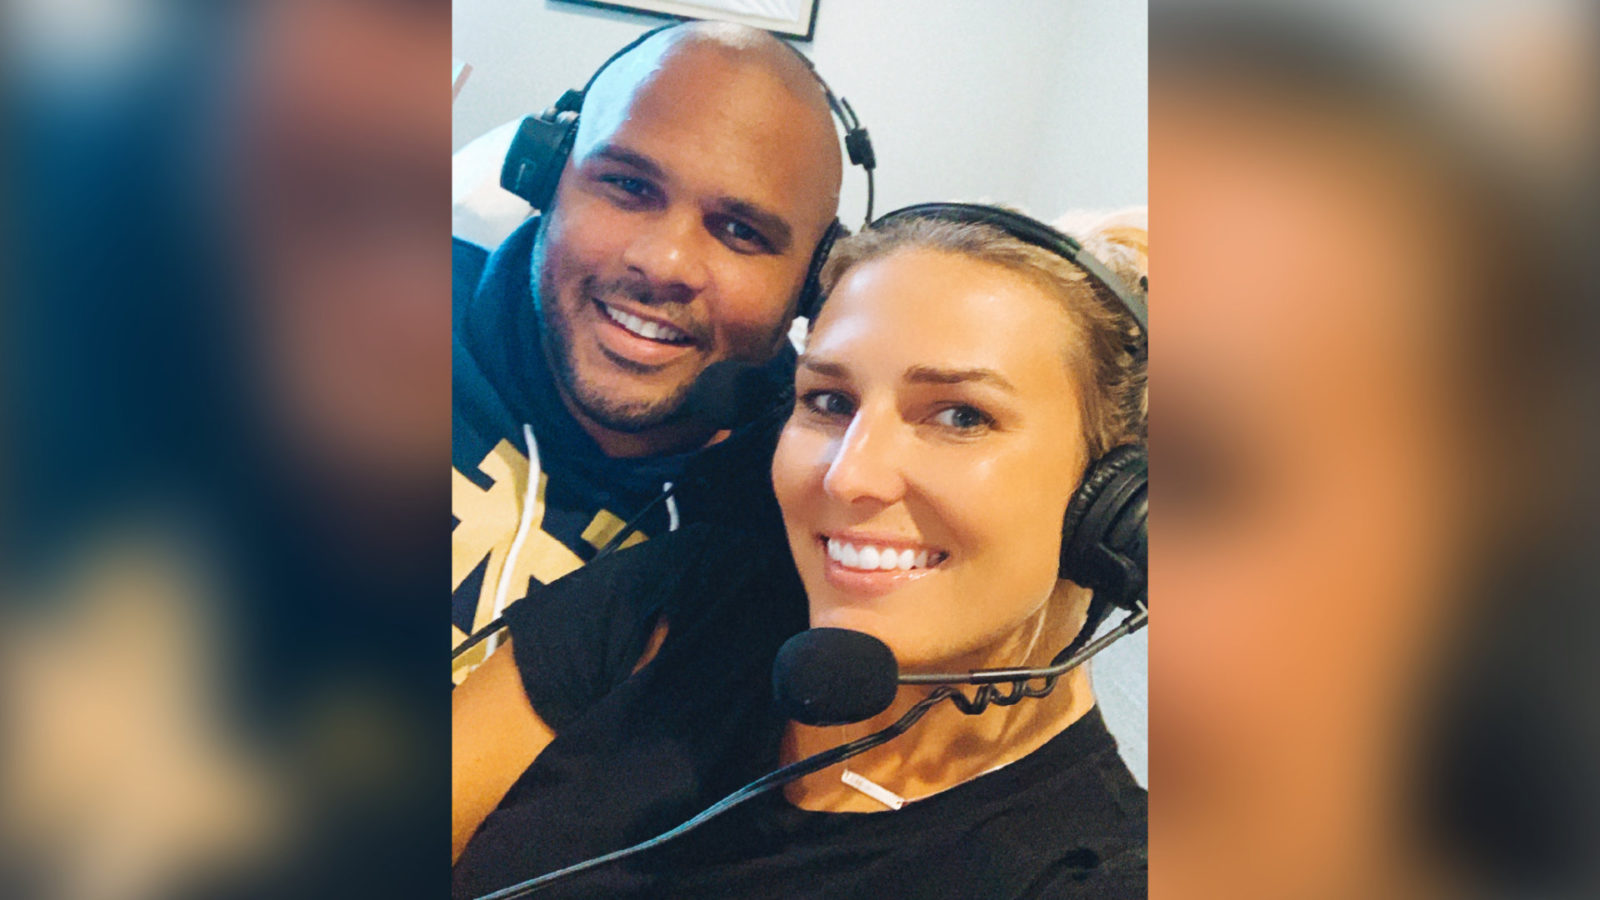 Jordan Cornette Wife Shae Peppler: Who Is She? Everything About The ESPN Sports Analyst And Host